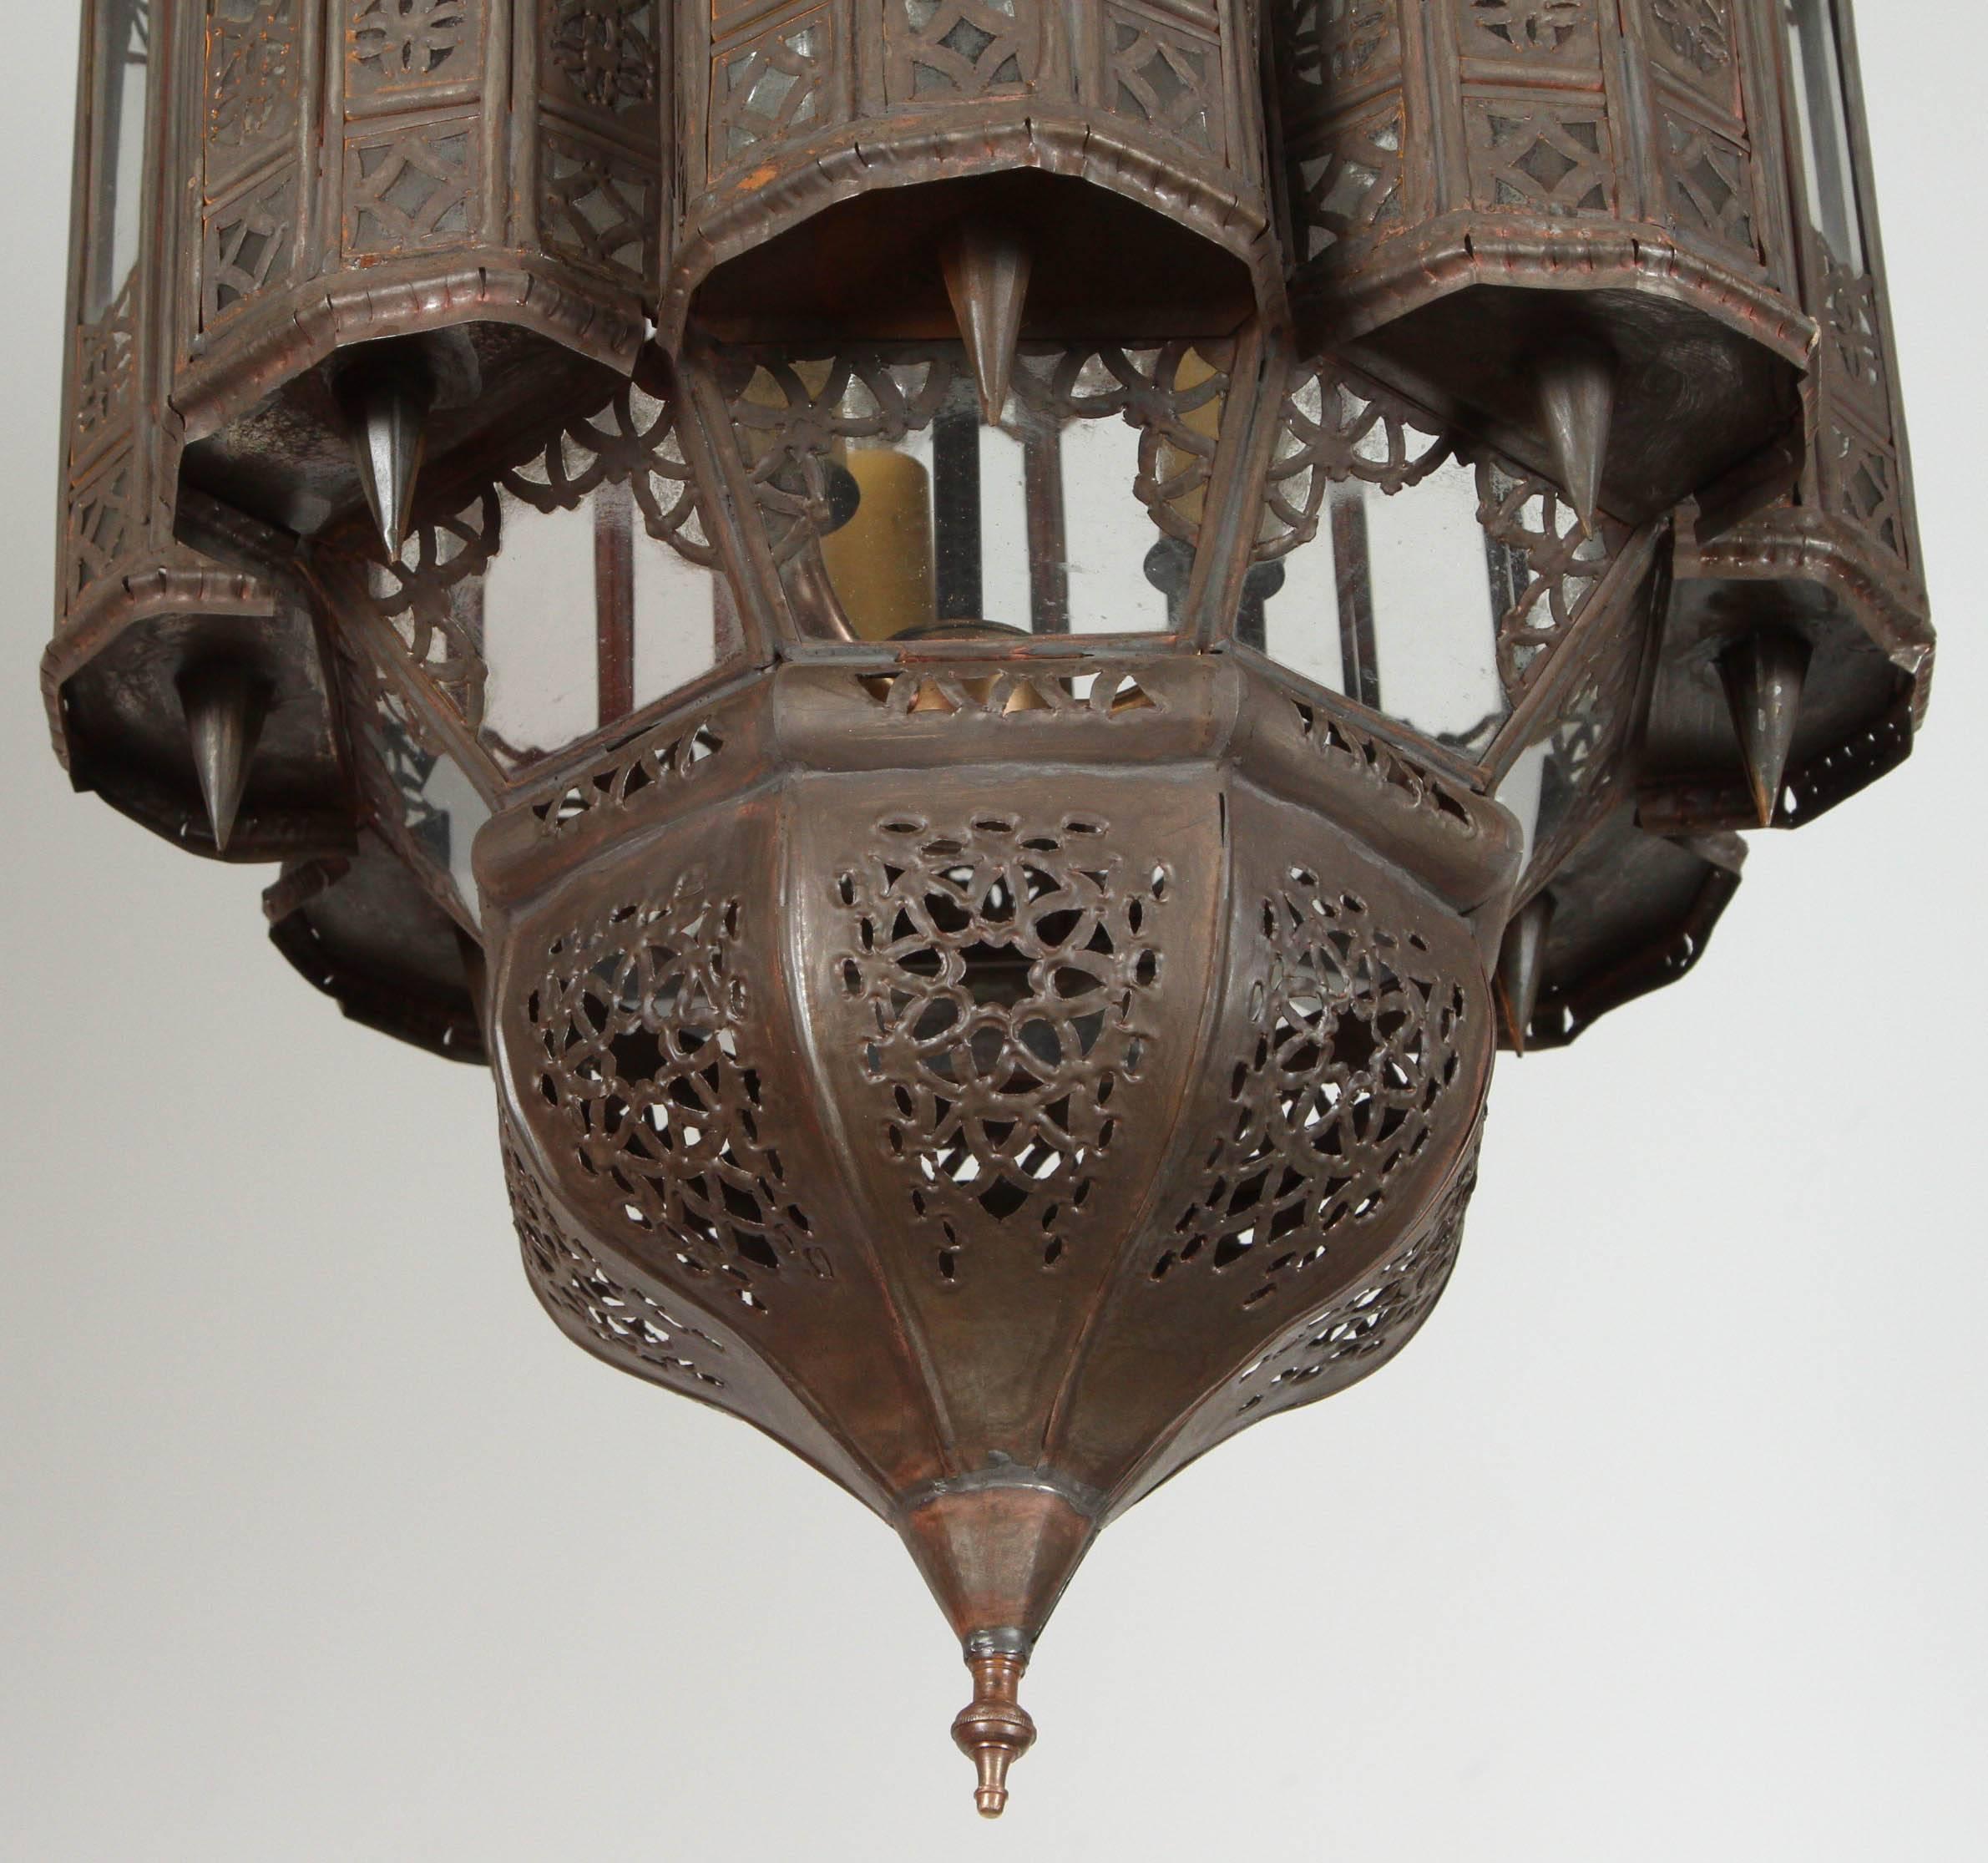 Moroccan handcrafted Mamounia pendant.
Mamounia lantern handmade in Marrakech, very fine Moorish filigree metal hand-cut in Moorish designs, clear glass patterned.
Rewired in the US for three light bulbs.
Comes with chain and canopy ready to